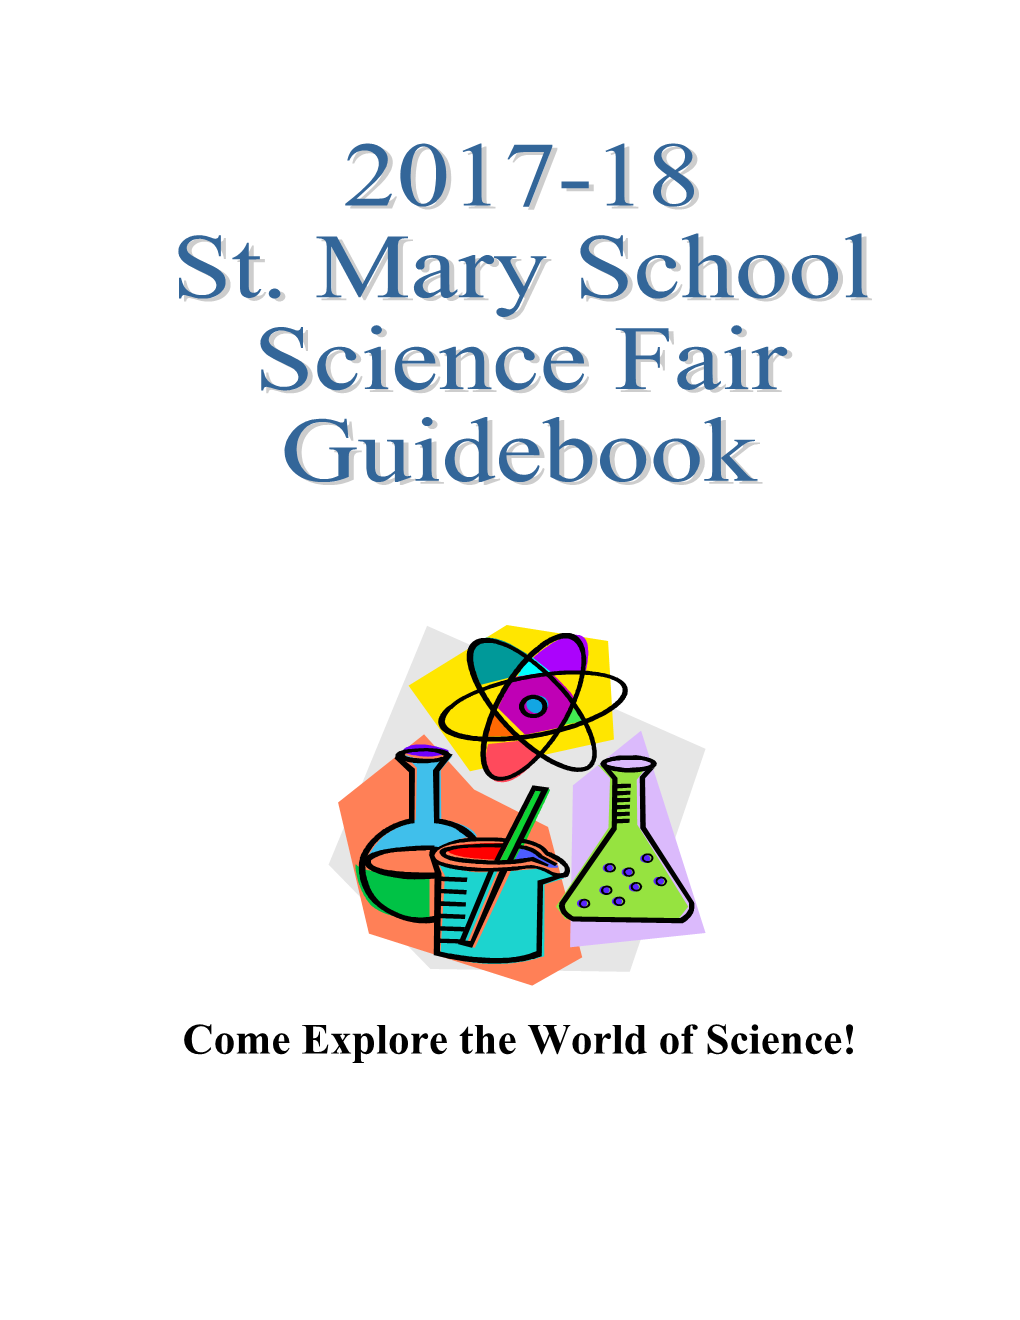 Come Explore the World of Science!